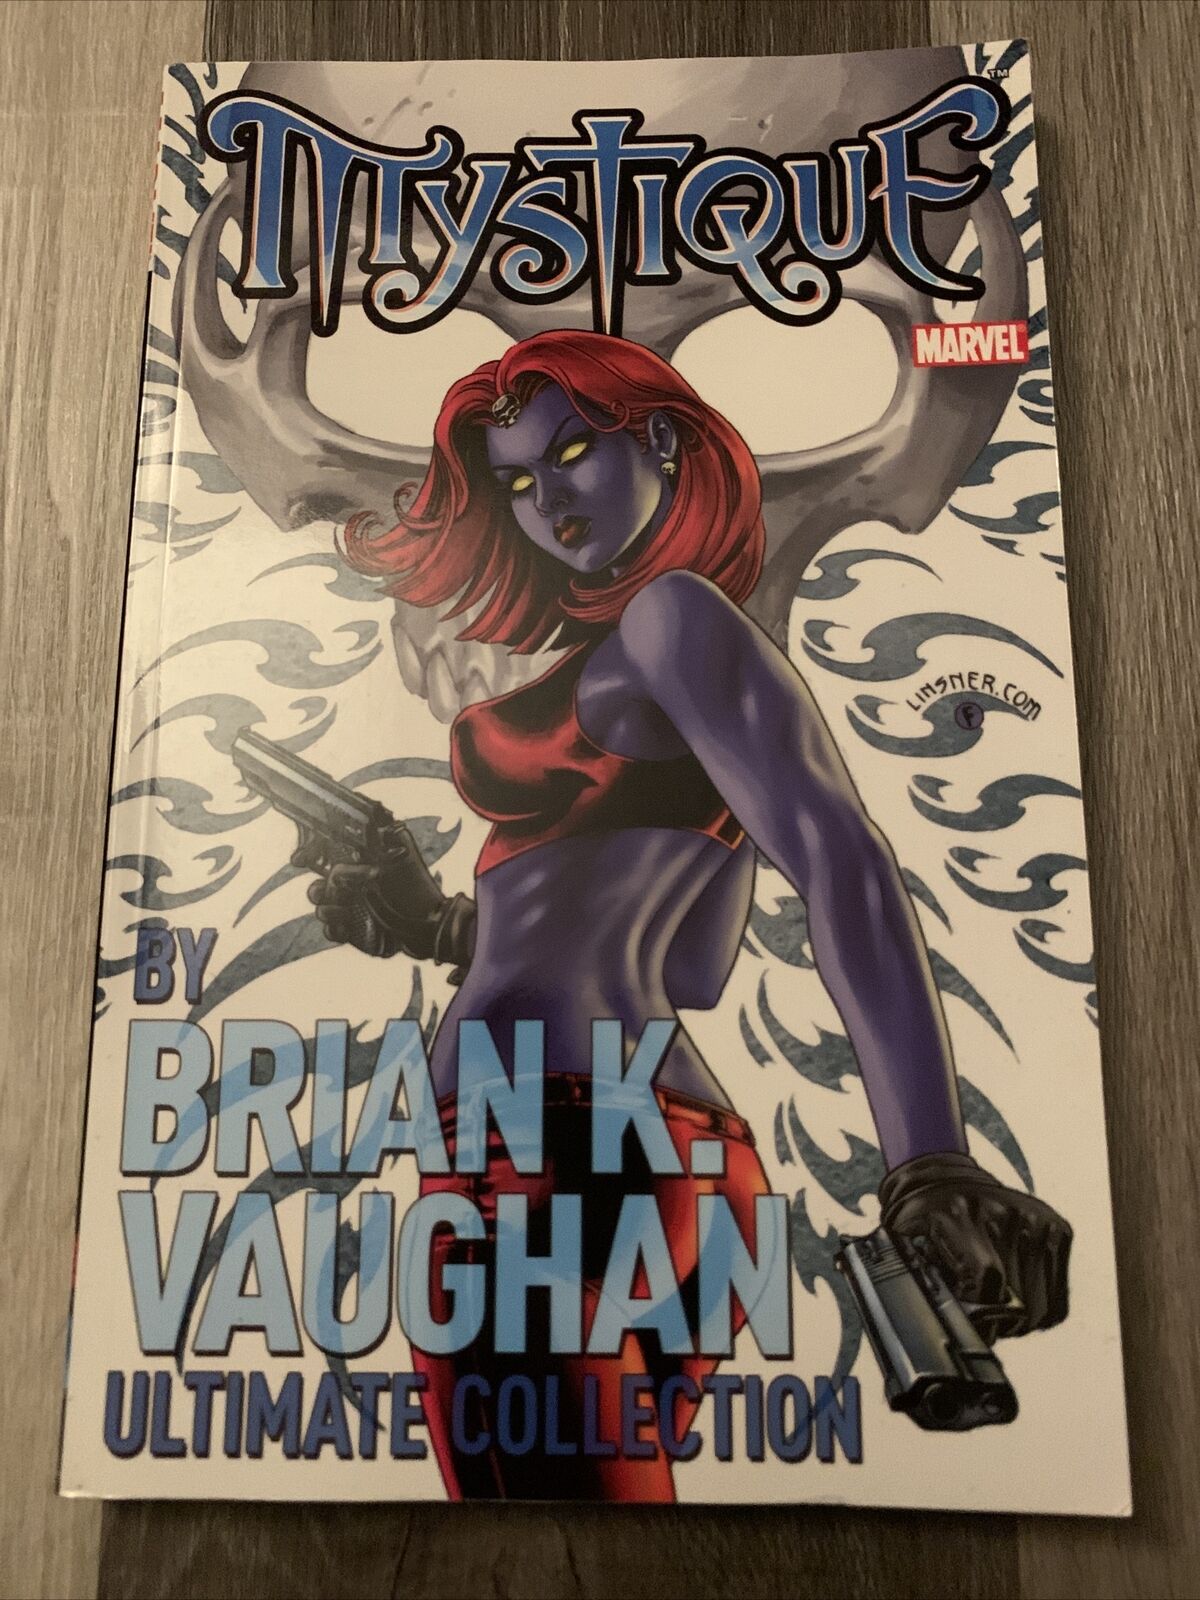 Mystique by Brian K. Vaughan Ultimate Collection Complete Epic TPB OOP